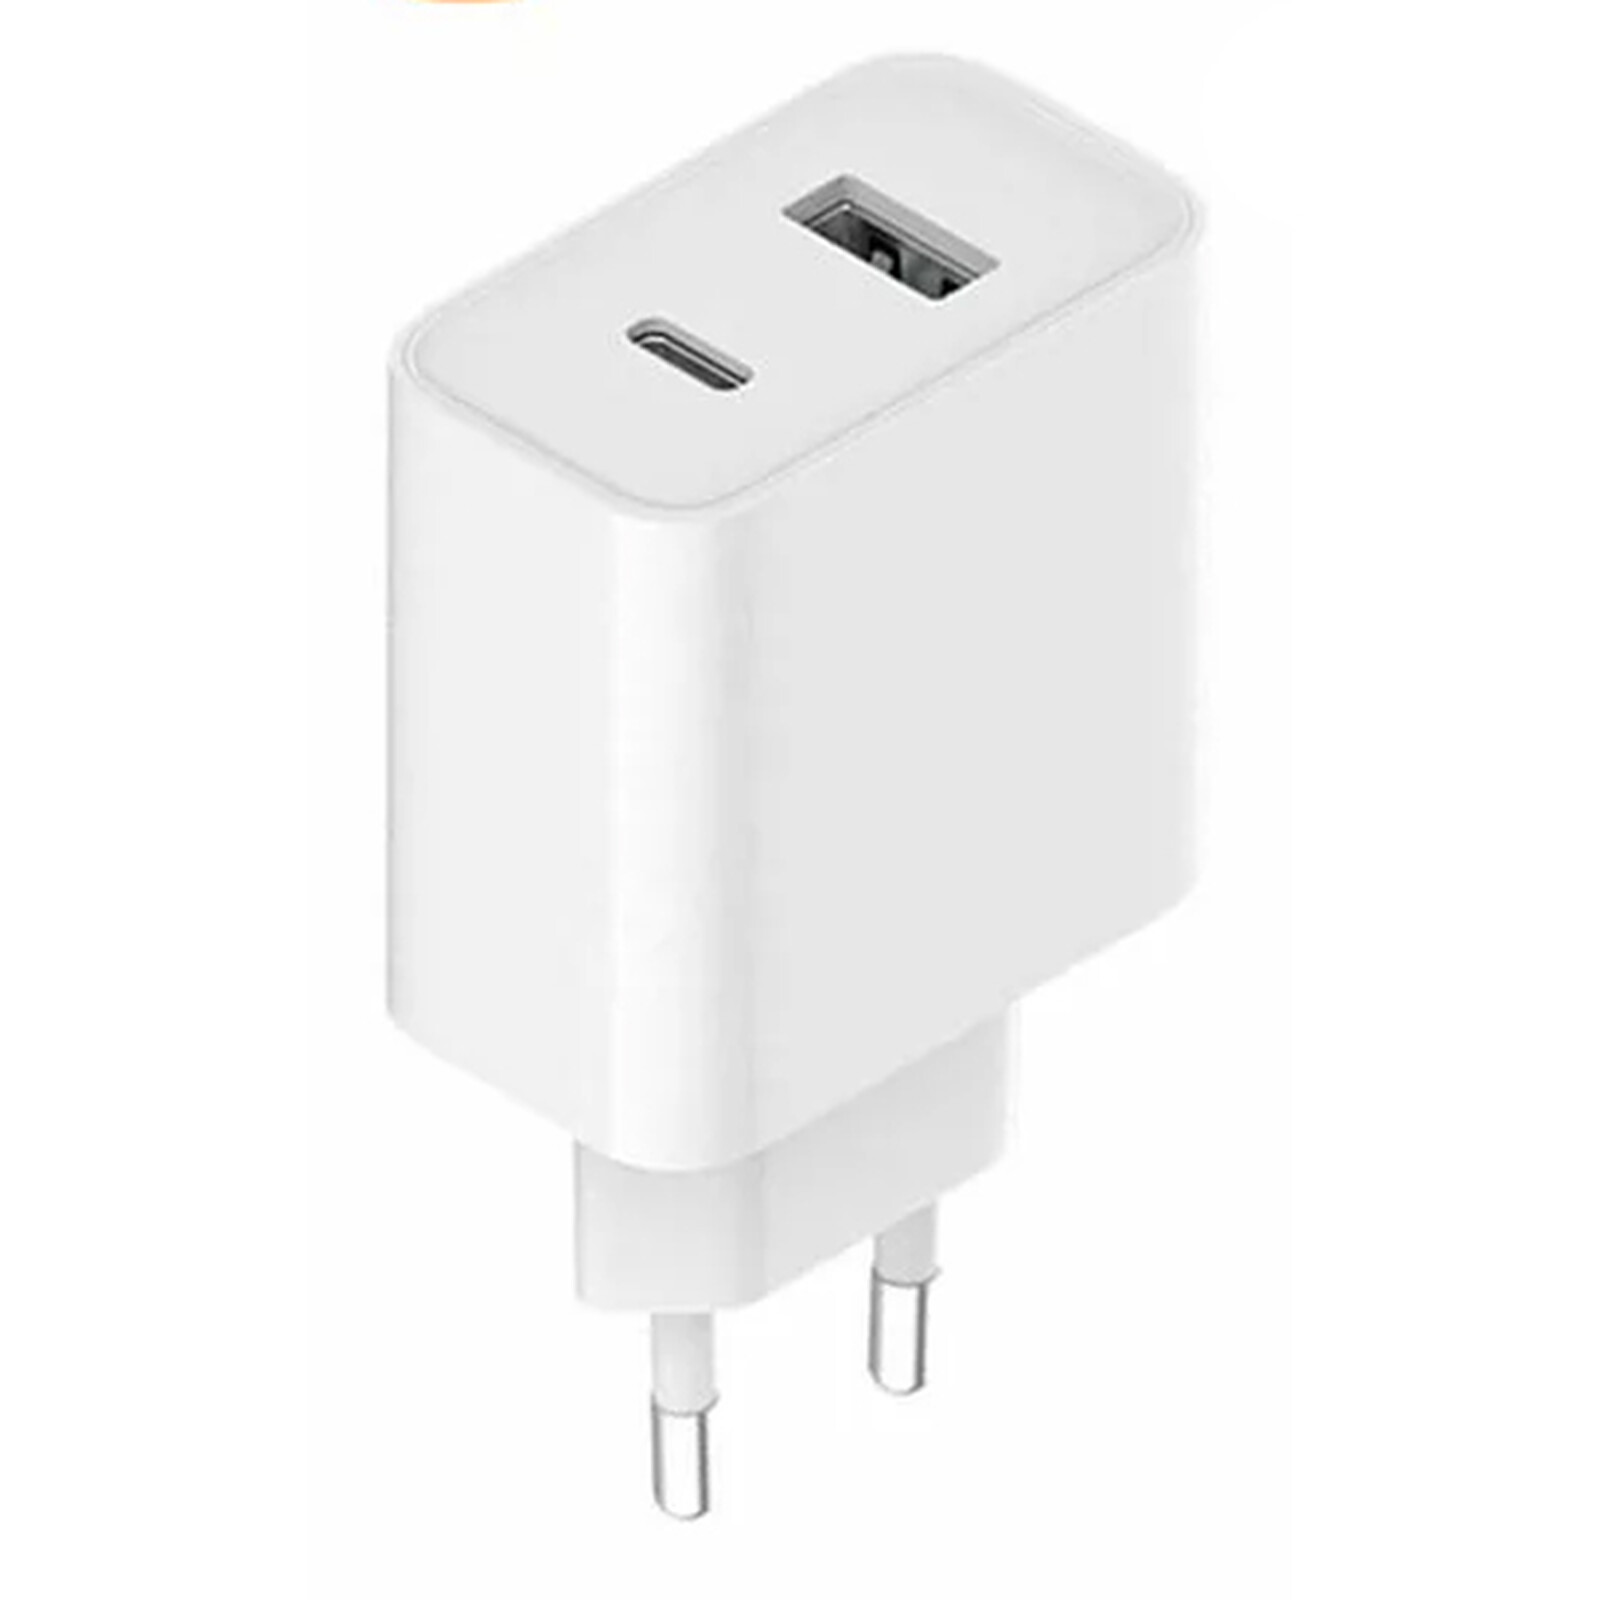 USB Wall Charger 33W + White USB to USB-C Cable, Official Xiaomi Product